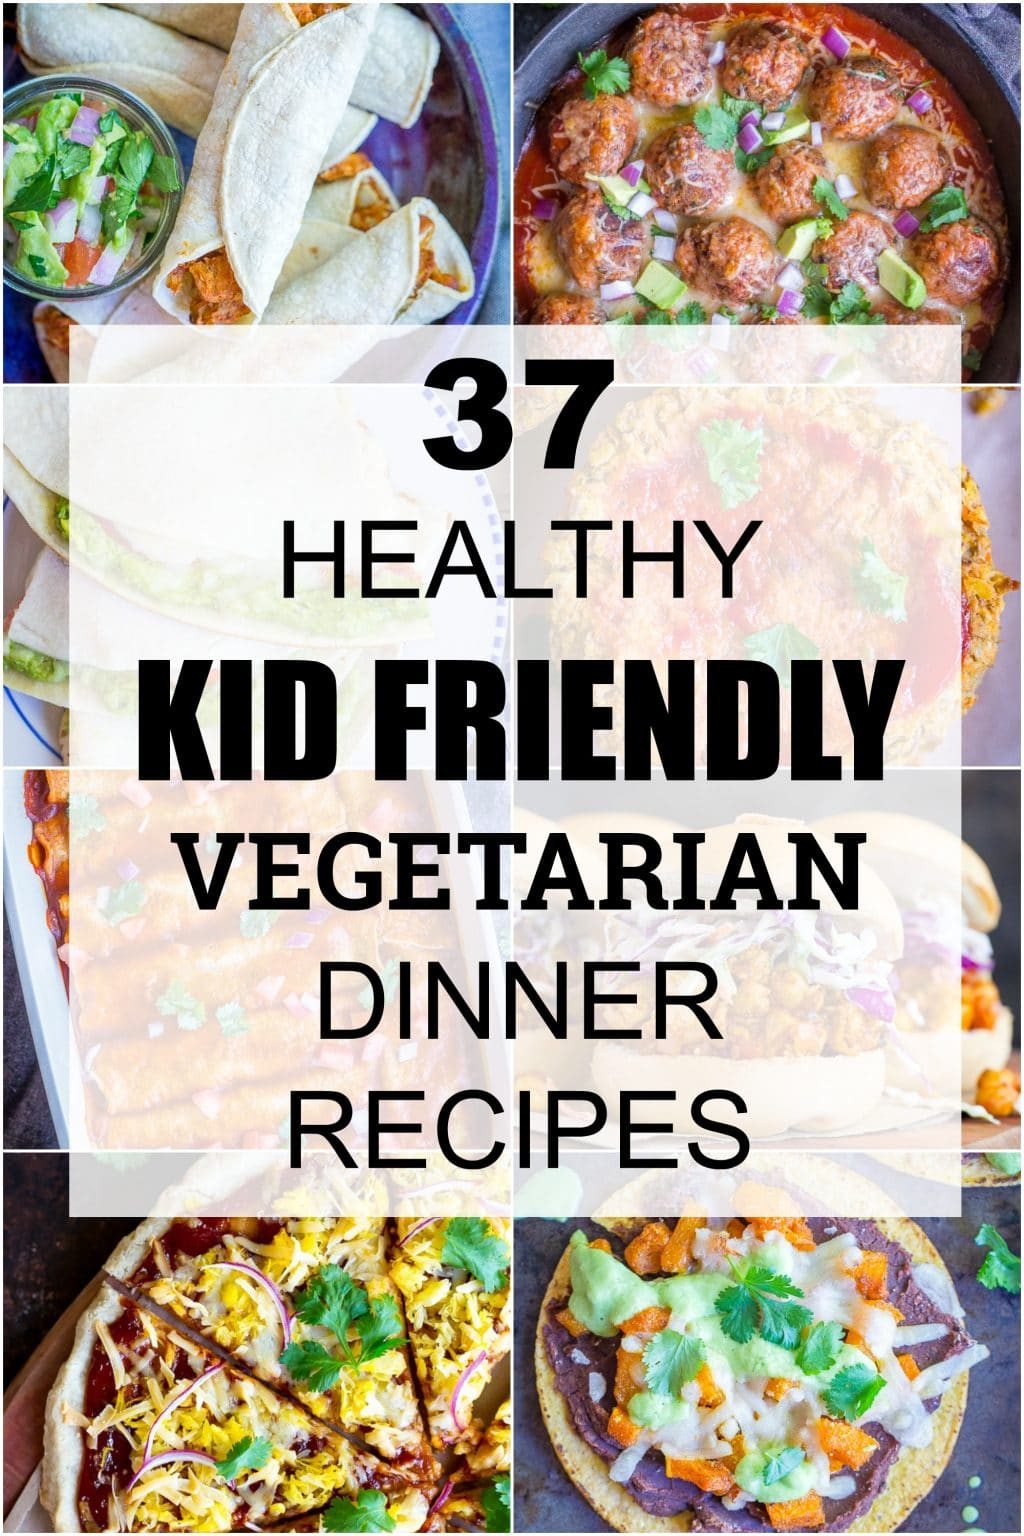 Kid Friendly Recipes For Dinner
 37 Healthy Kid Friendly Ve arian Dinner Recipes She